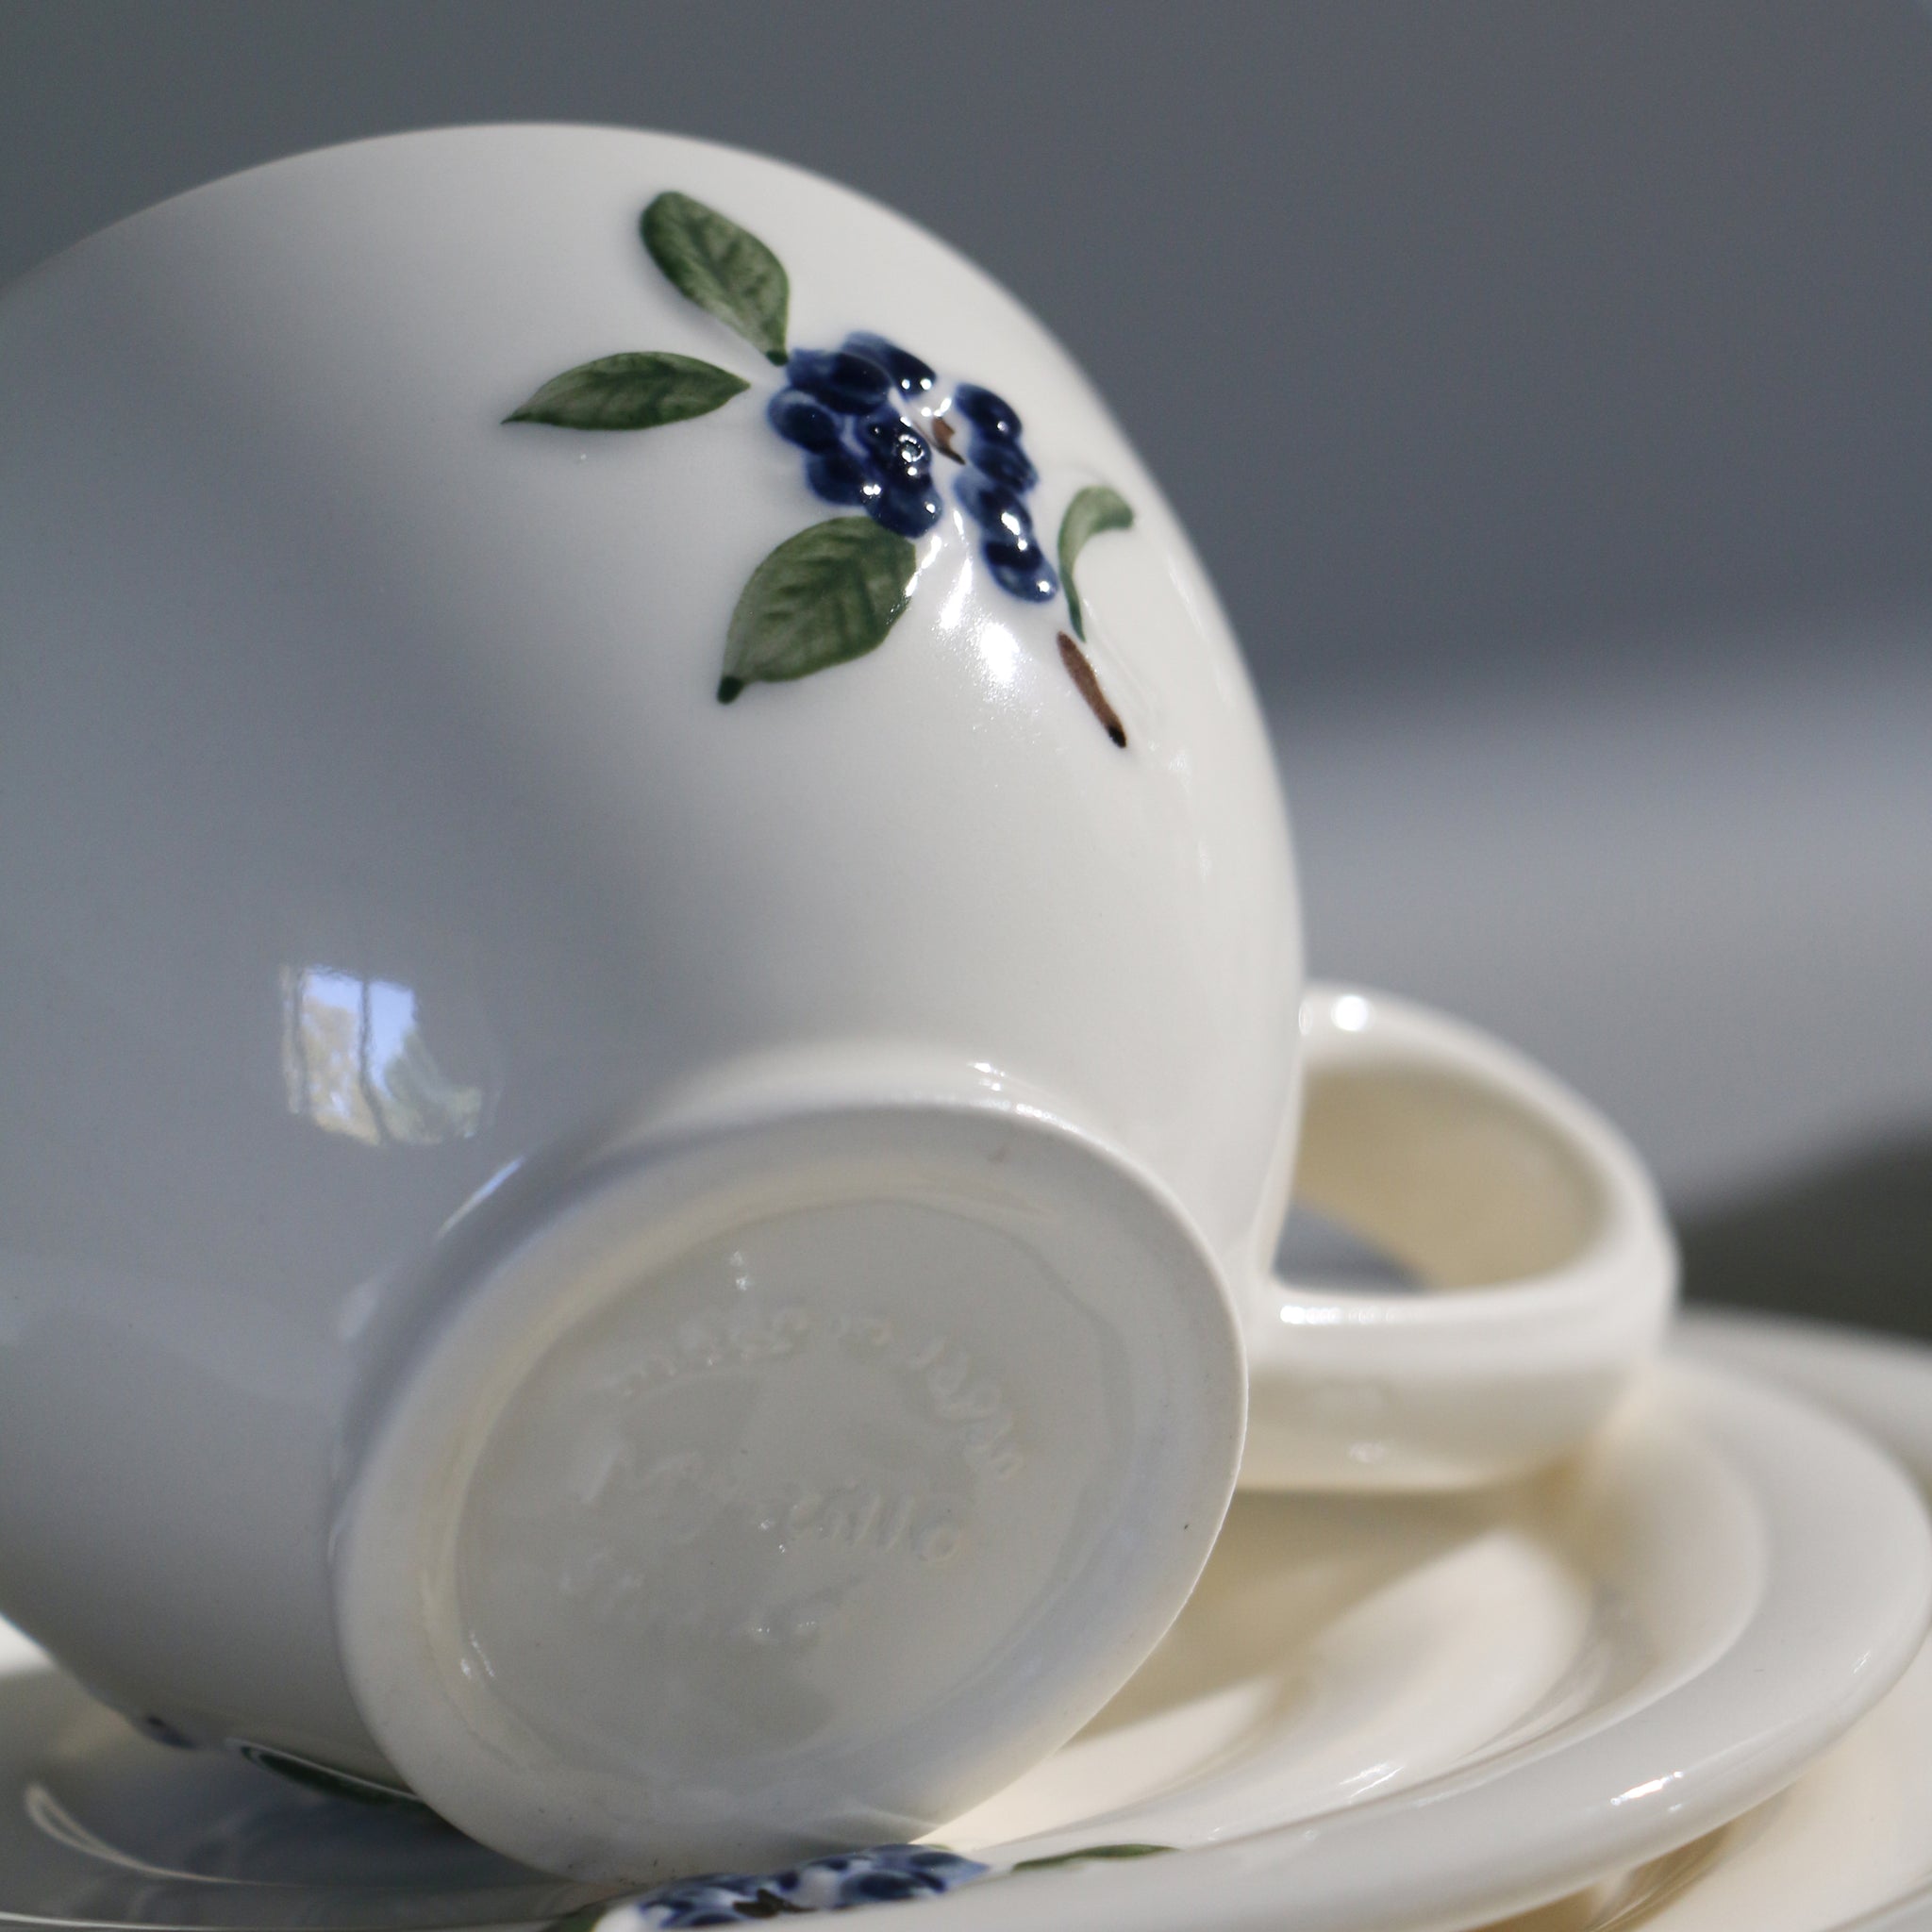 Myrtille Teapot and Plate